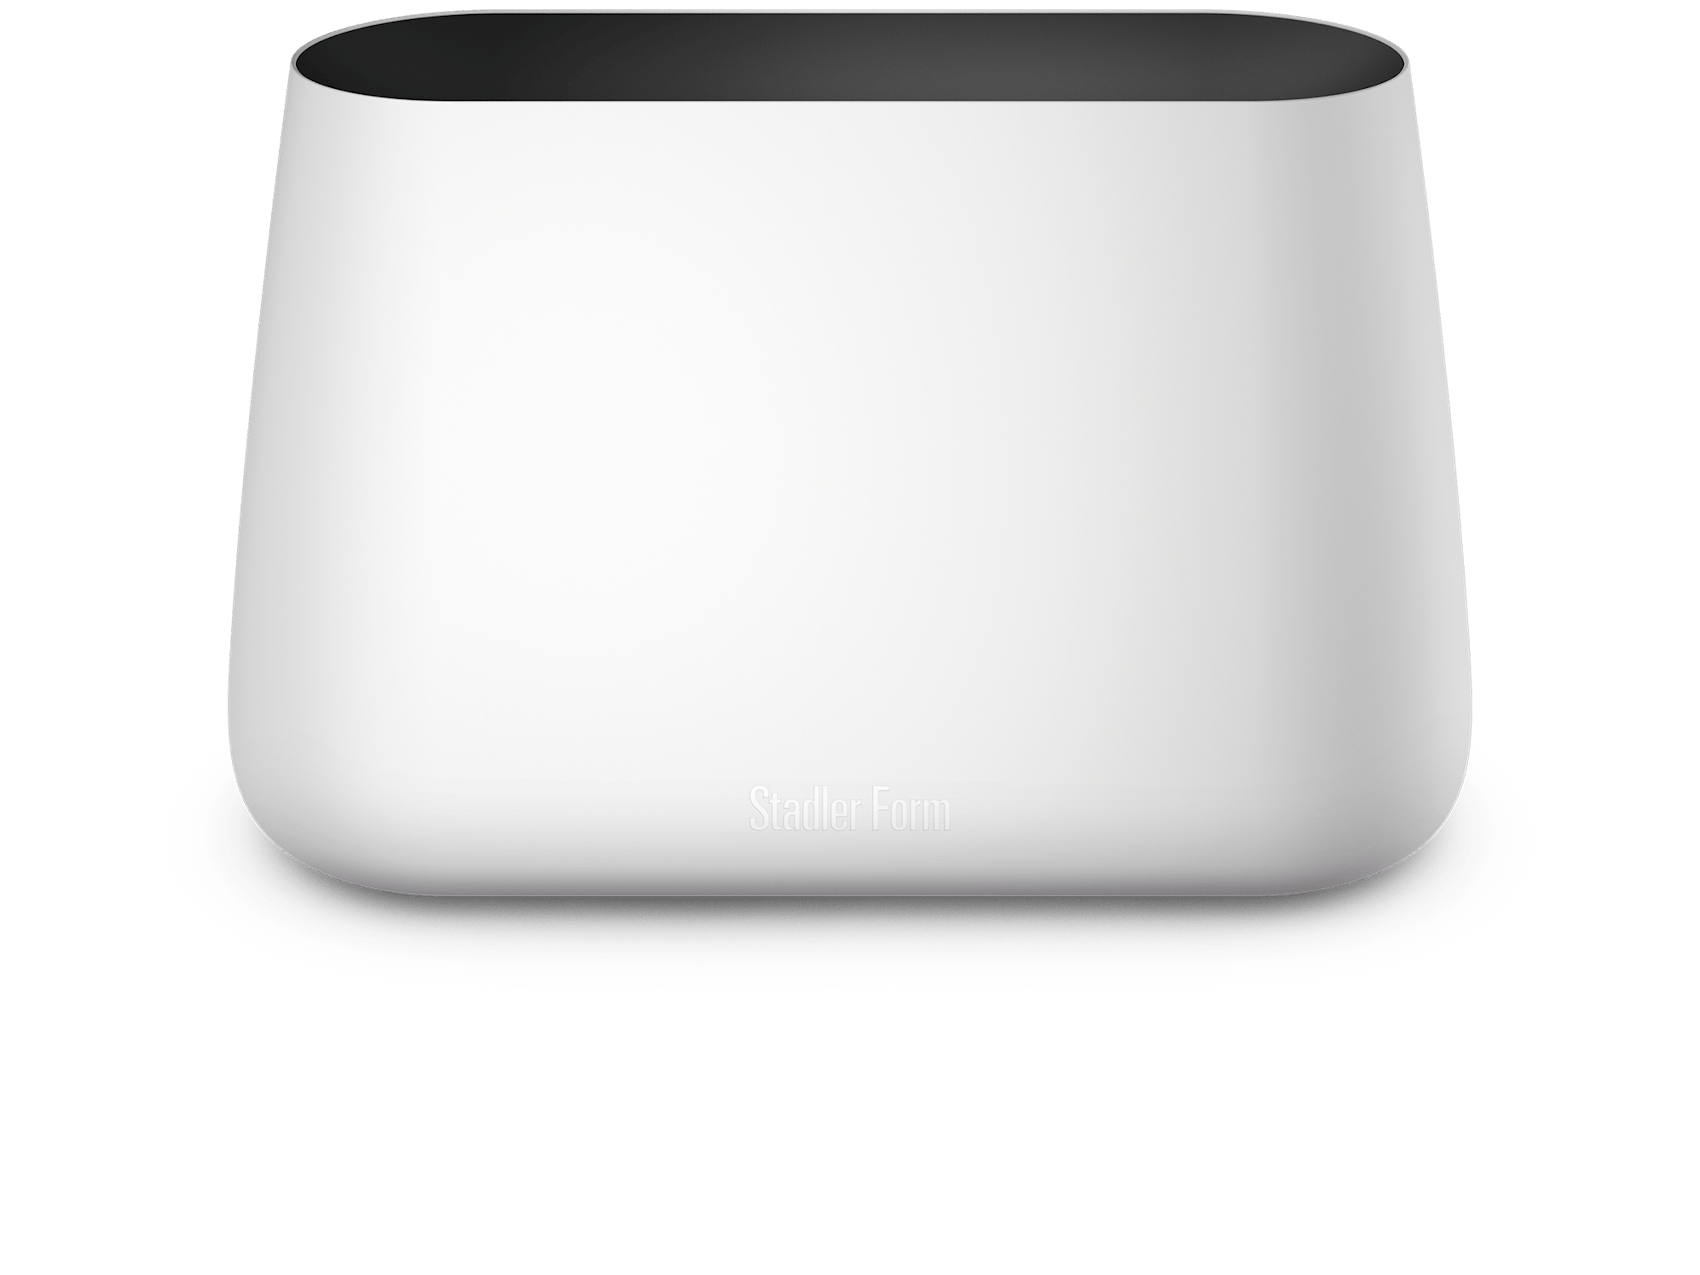 Ben humidifier by Stadler Form in white as front view